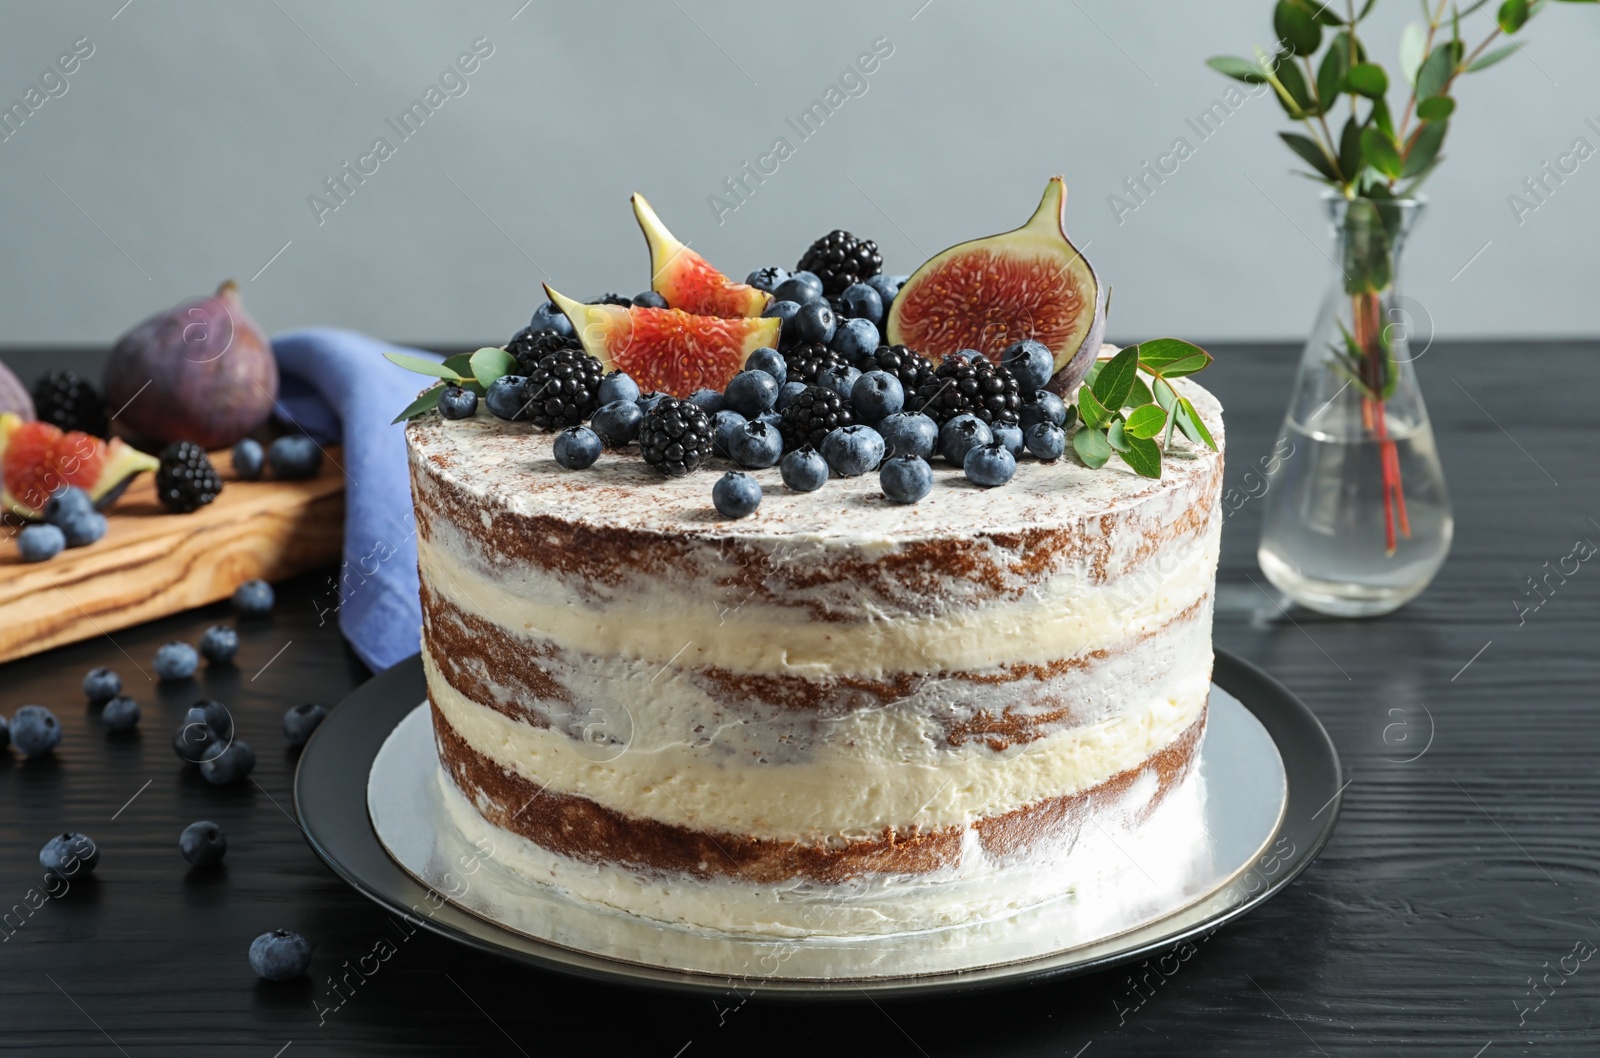 Photo of Delicious homemade cake with fresh berries served on dark wooden table